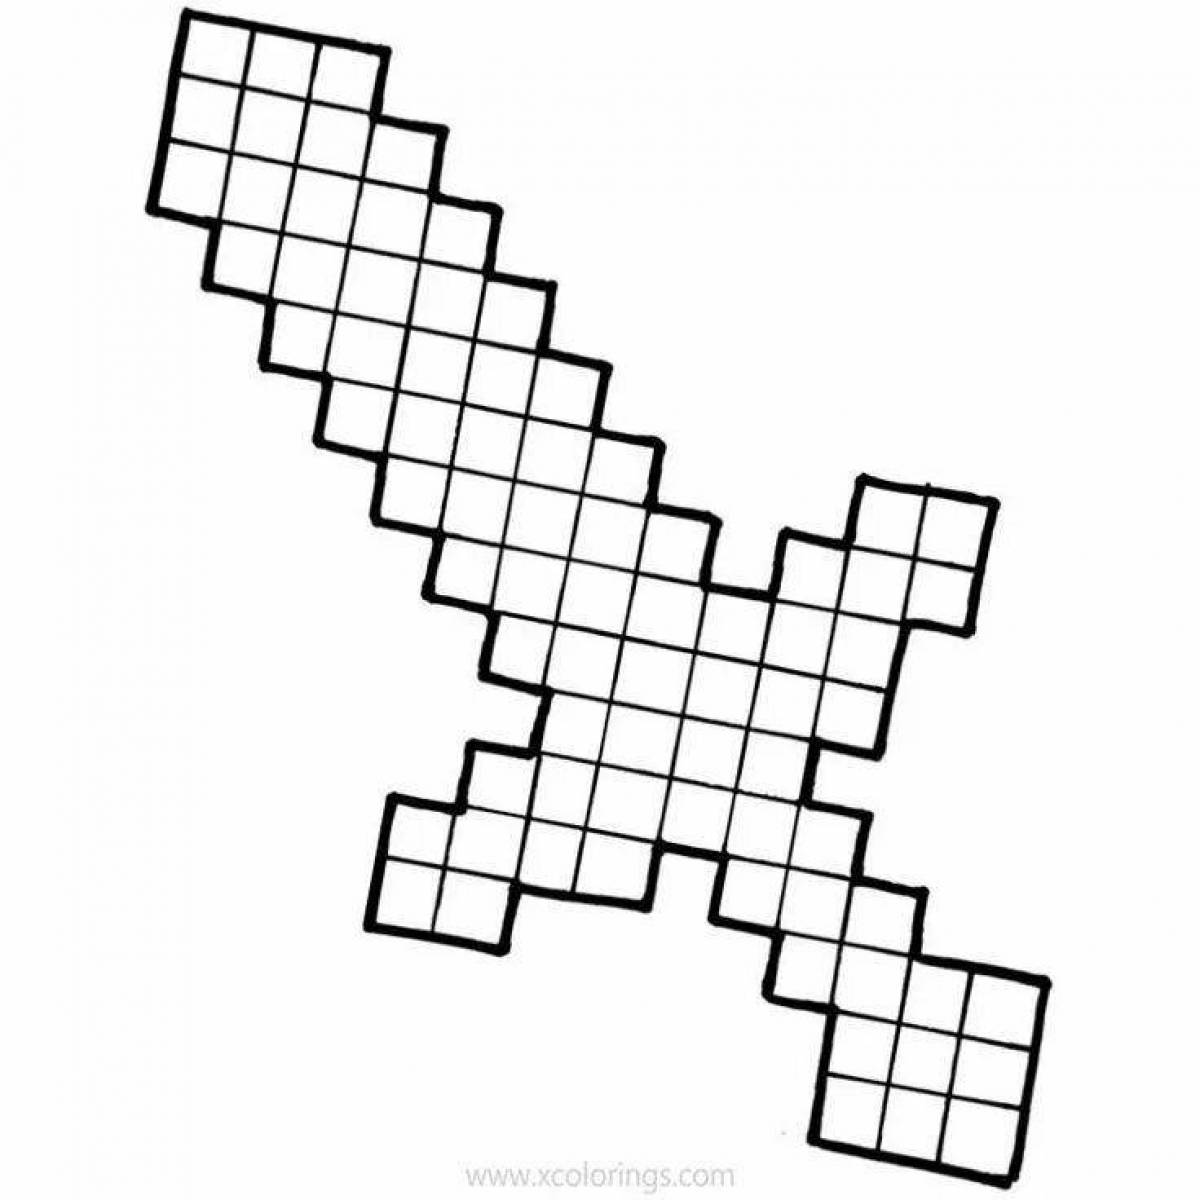 Fun minecraft tools coloring page